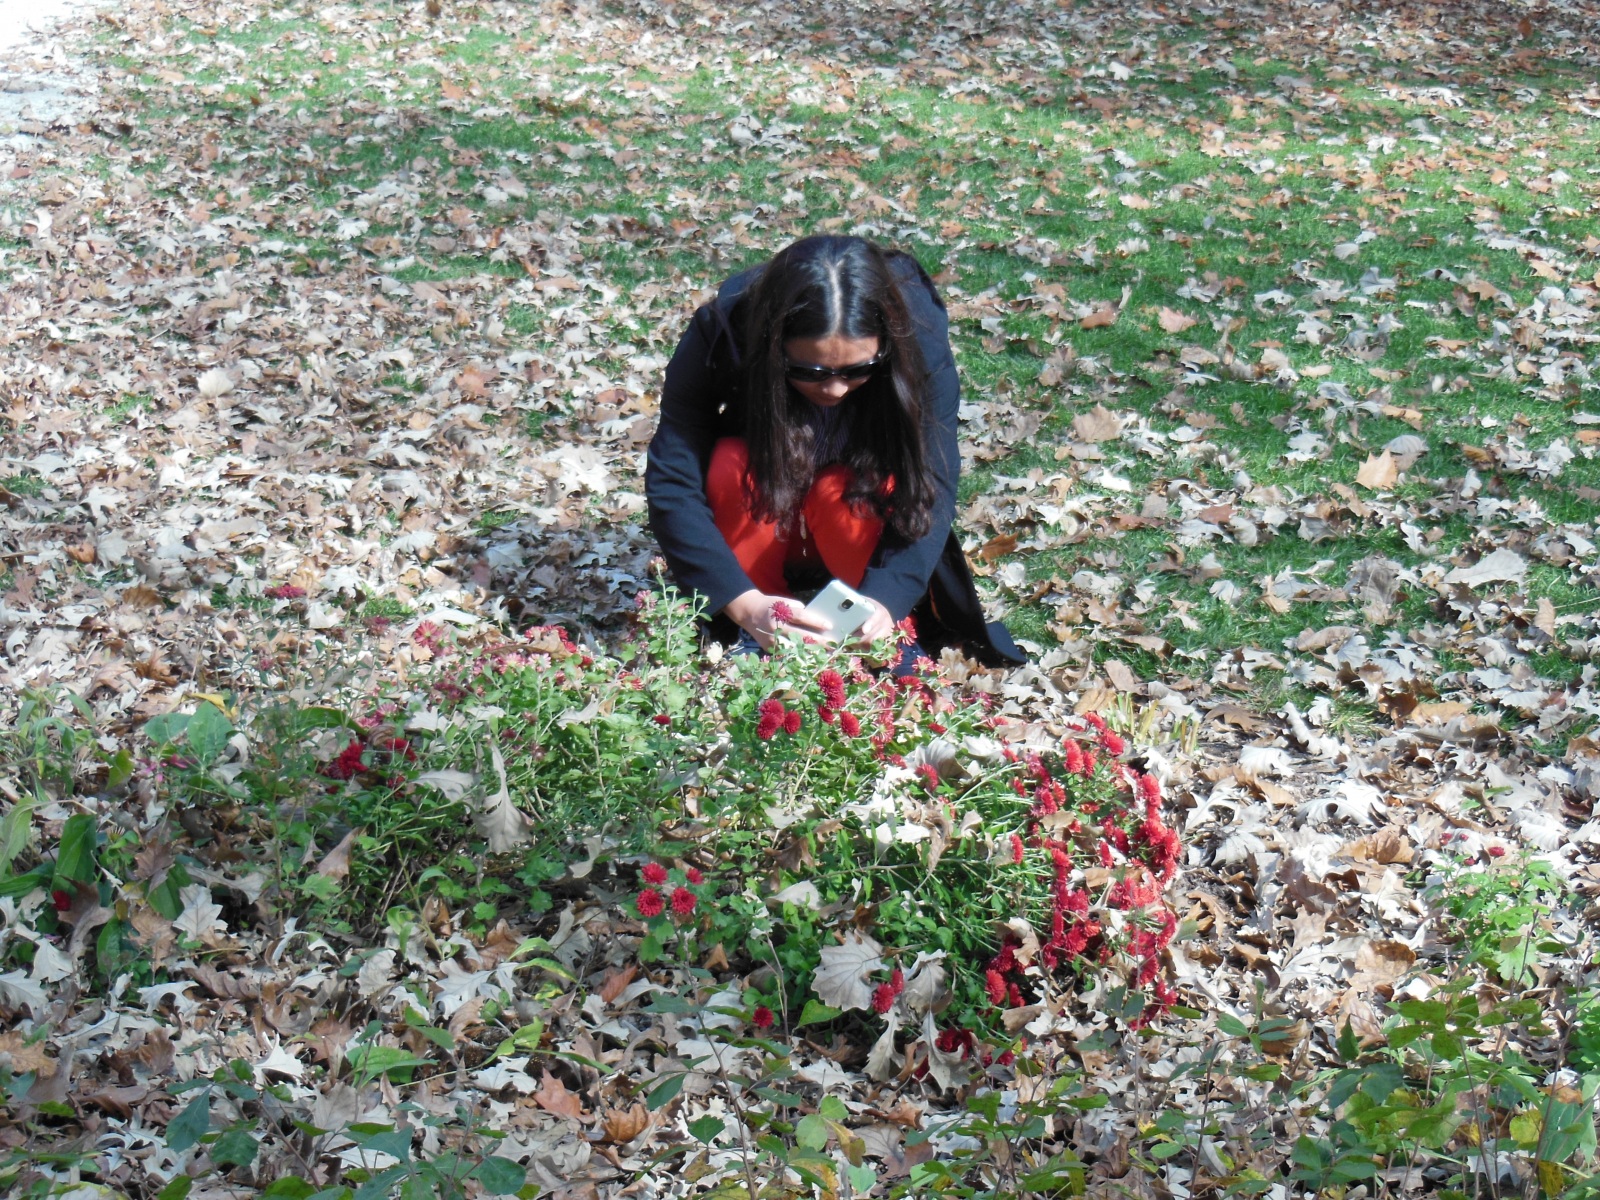 Student with flowers